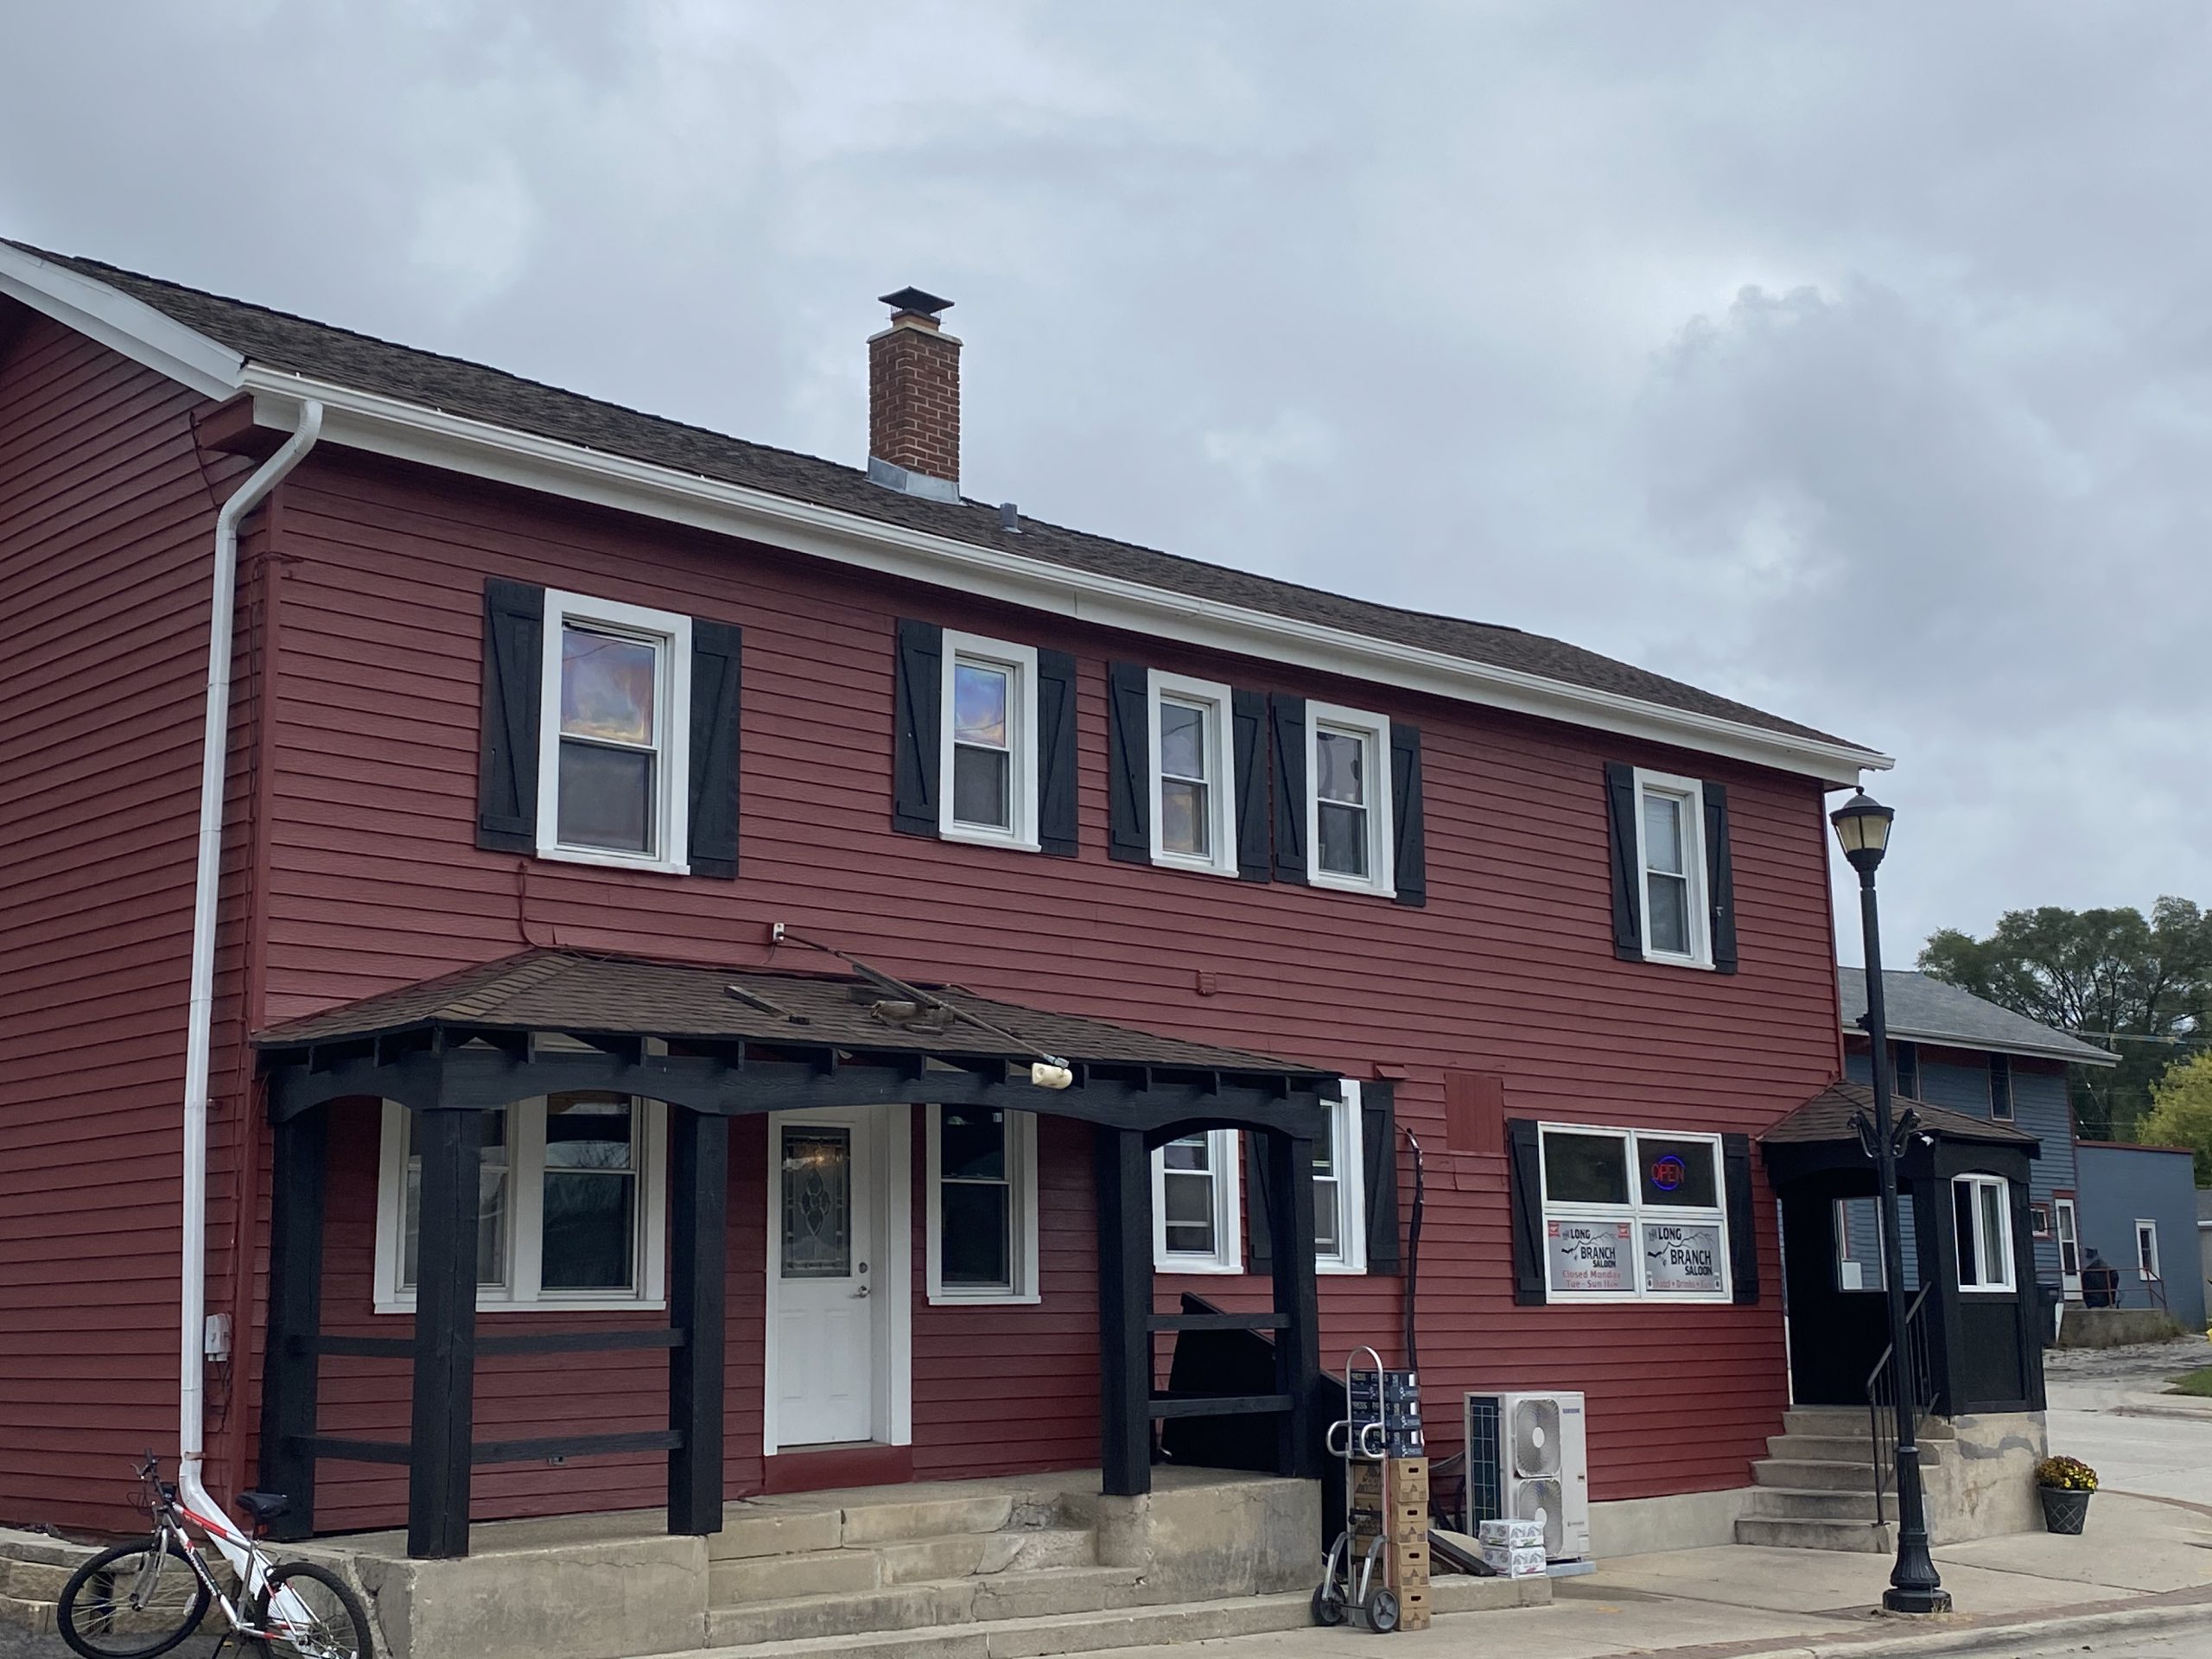 REAL ESTATE  Long Branch Saloon to be sold and new establishment open in  August 2022